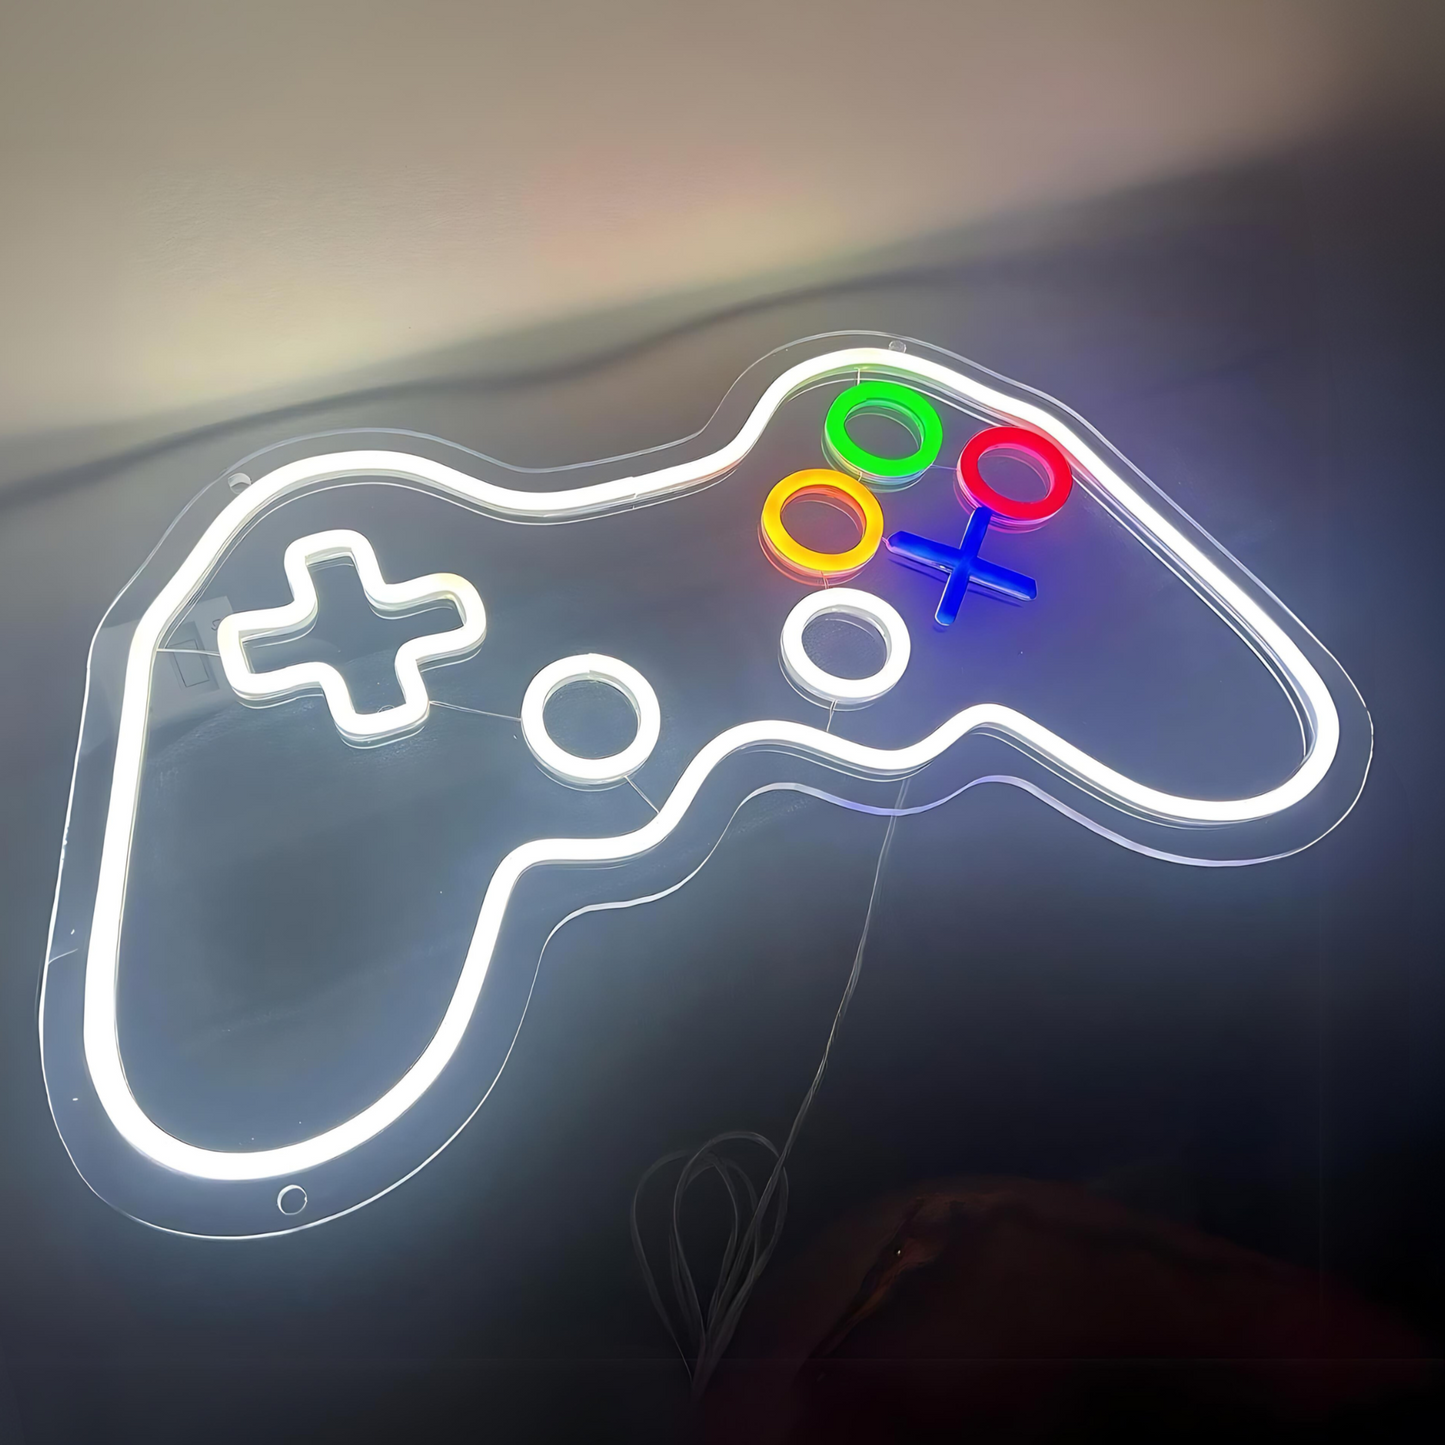 PLAYSTATION NEON SIGN — LED NEON SIGN